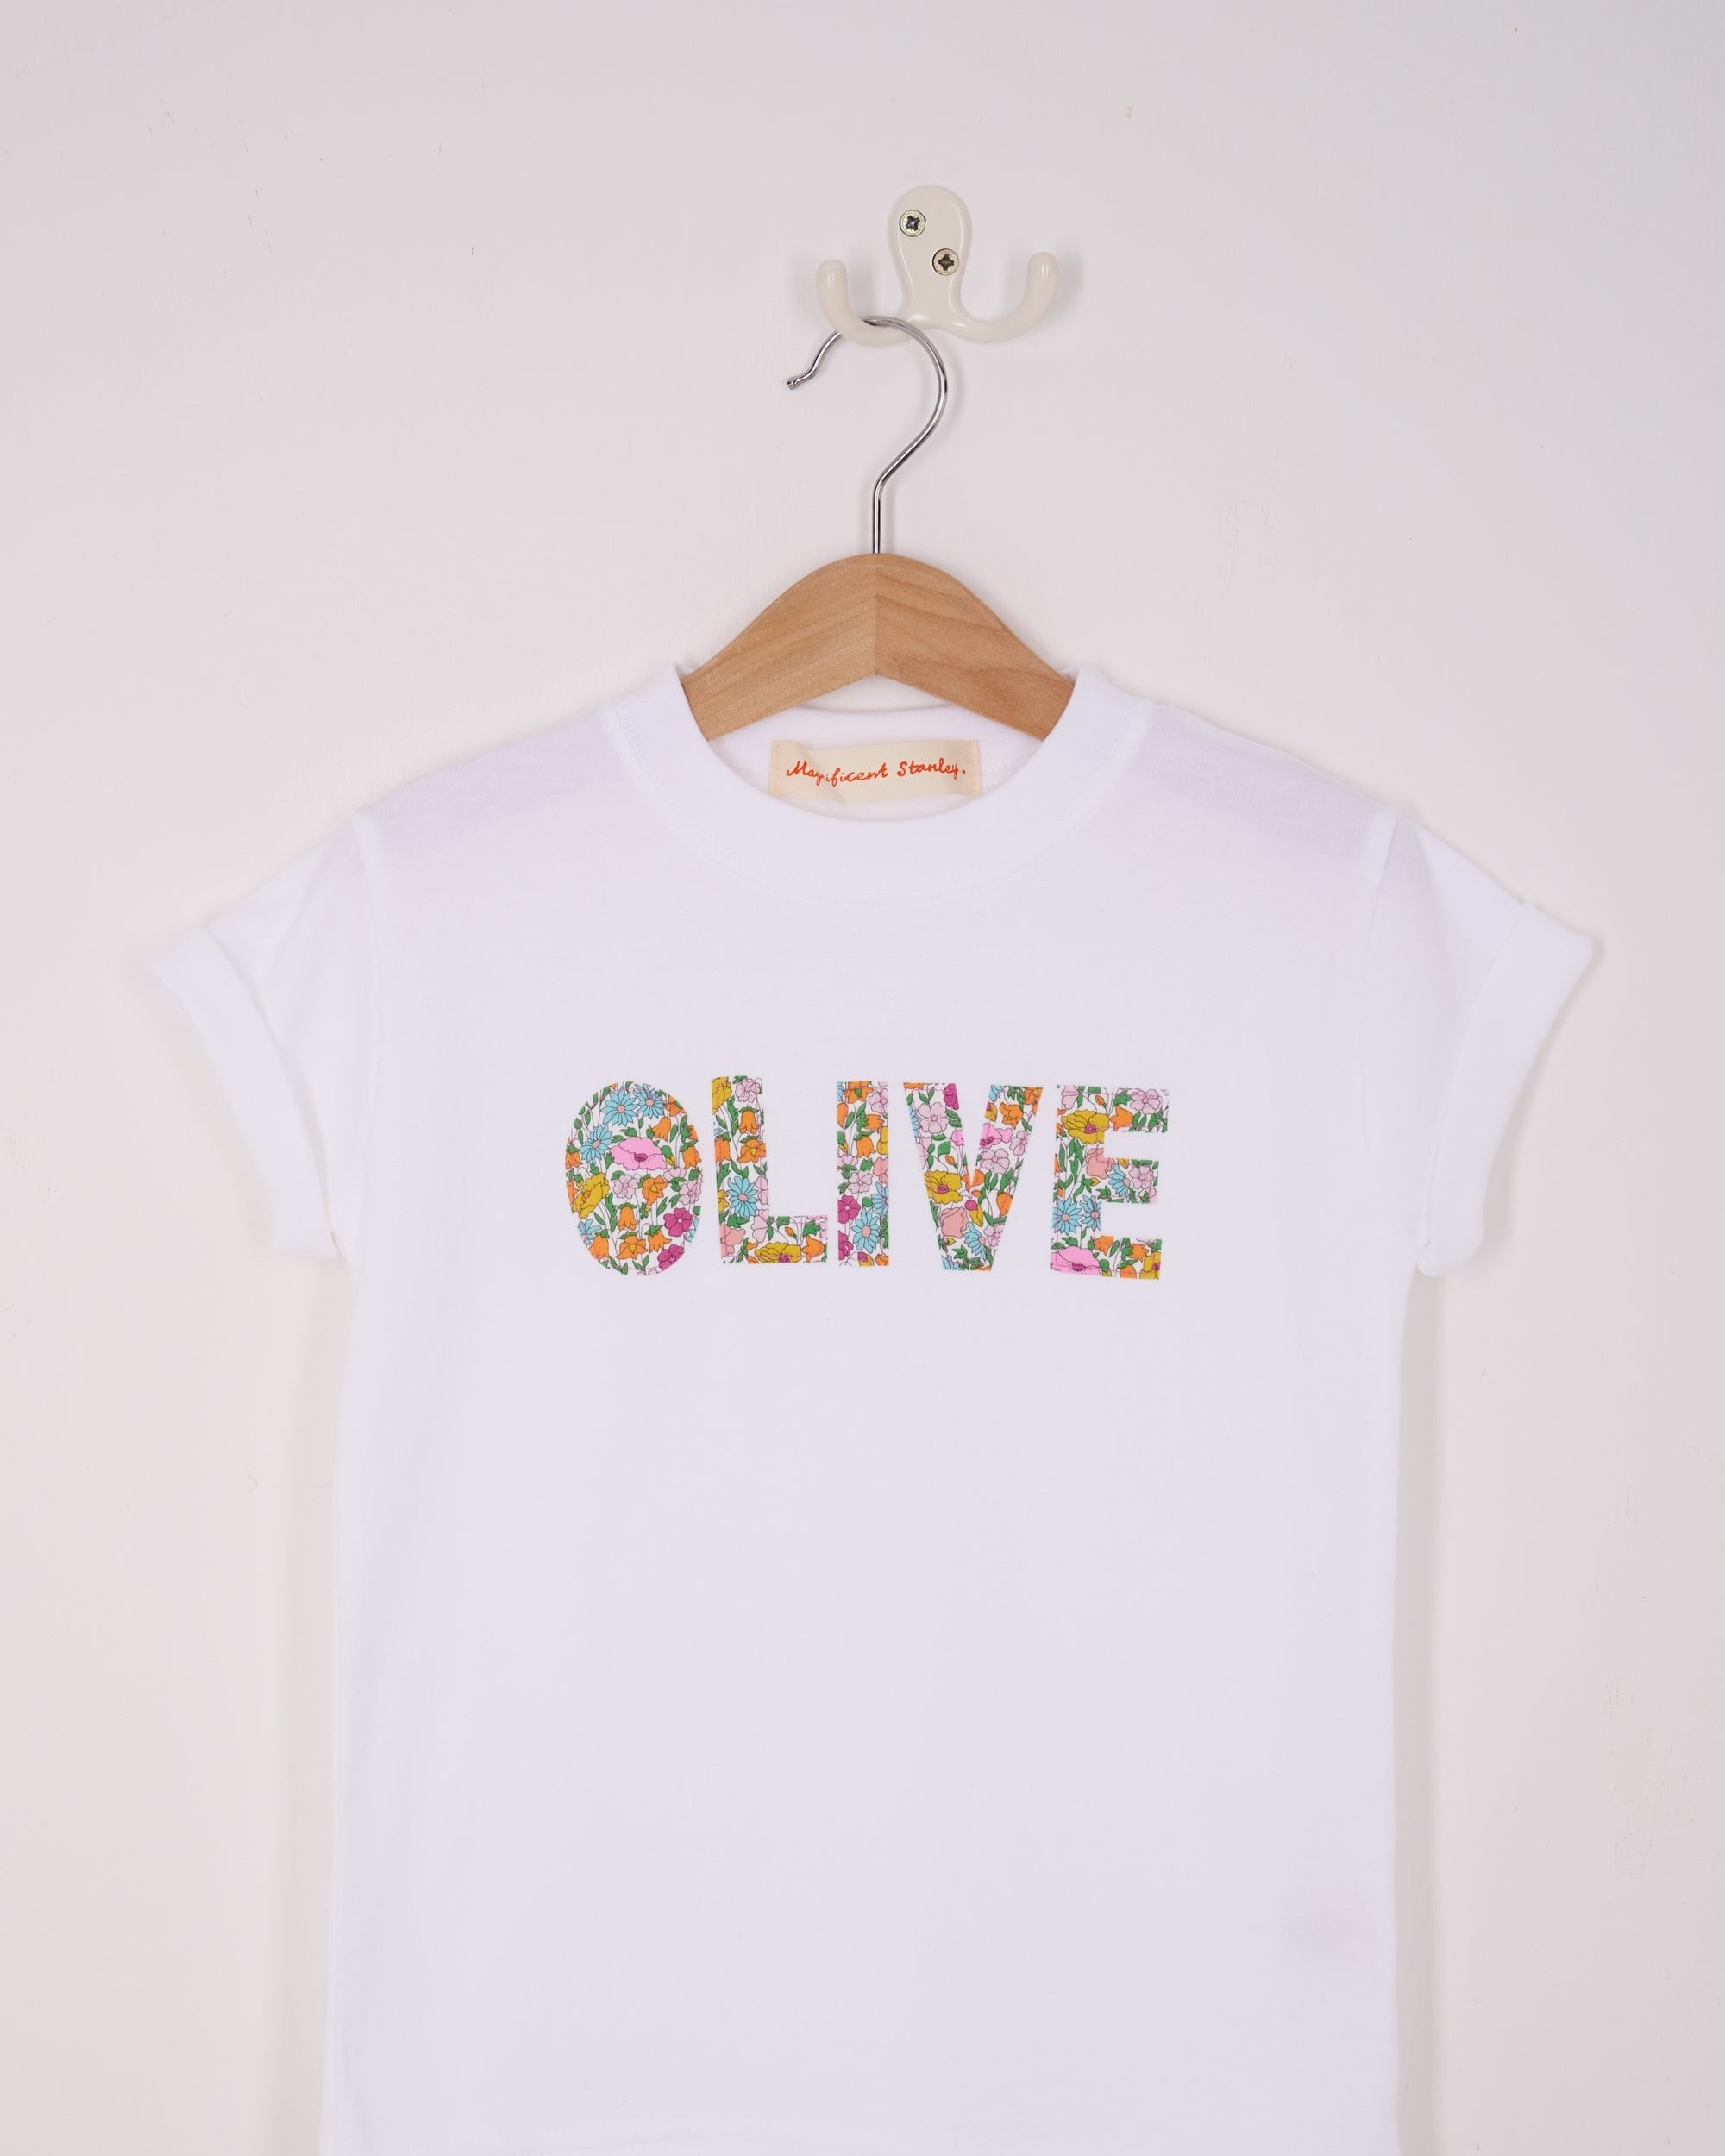 Magnificent Stanley Tee Name White T-Shirt in Choice of Liberty Print